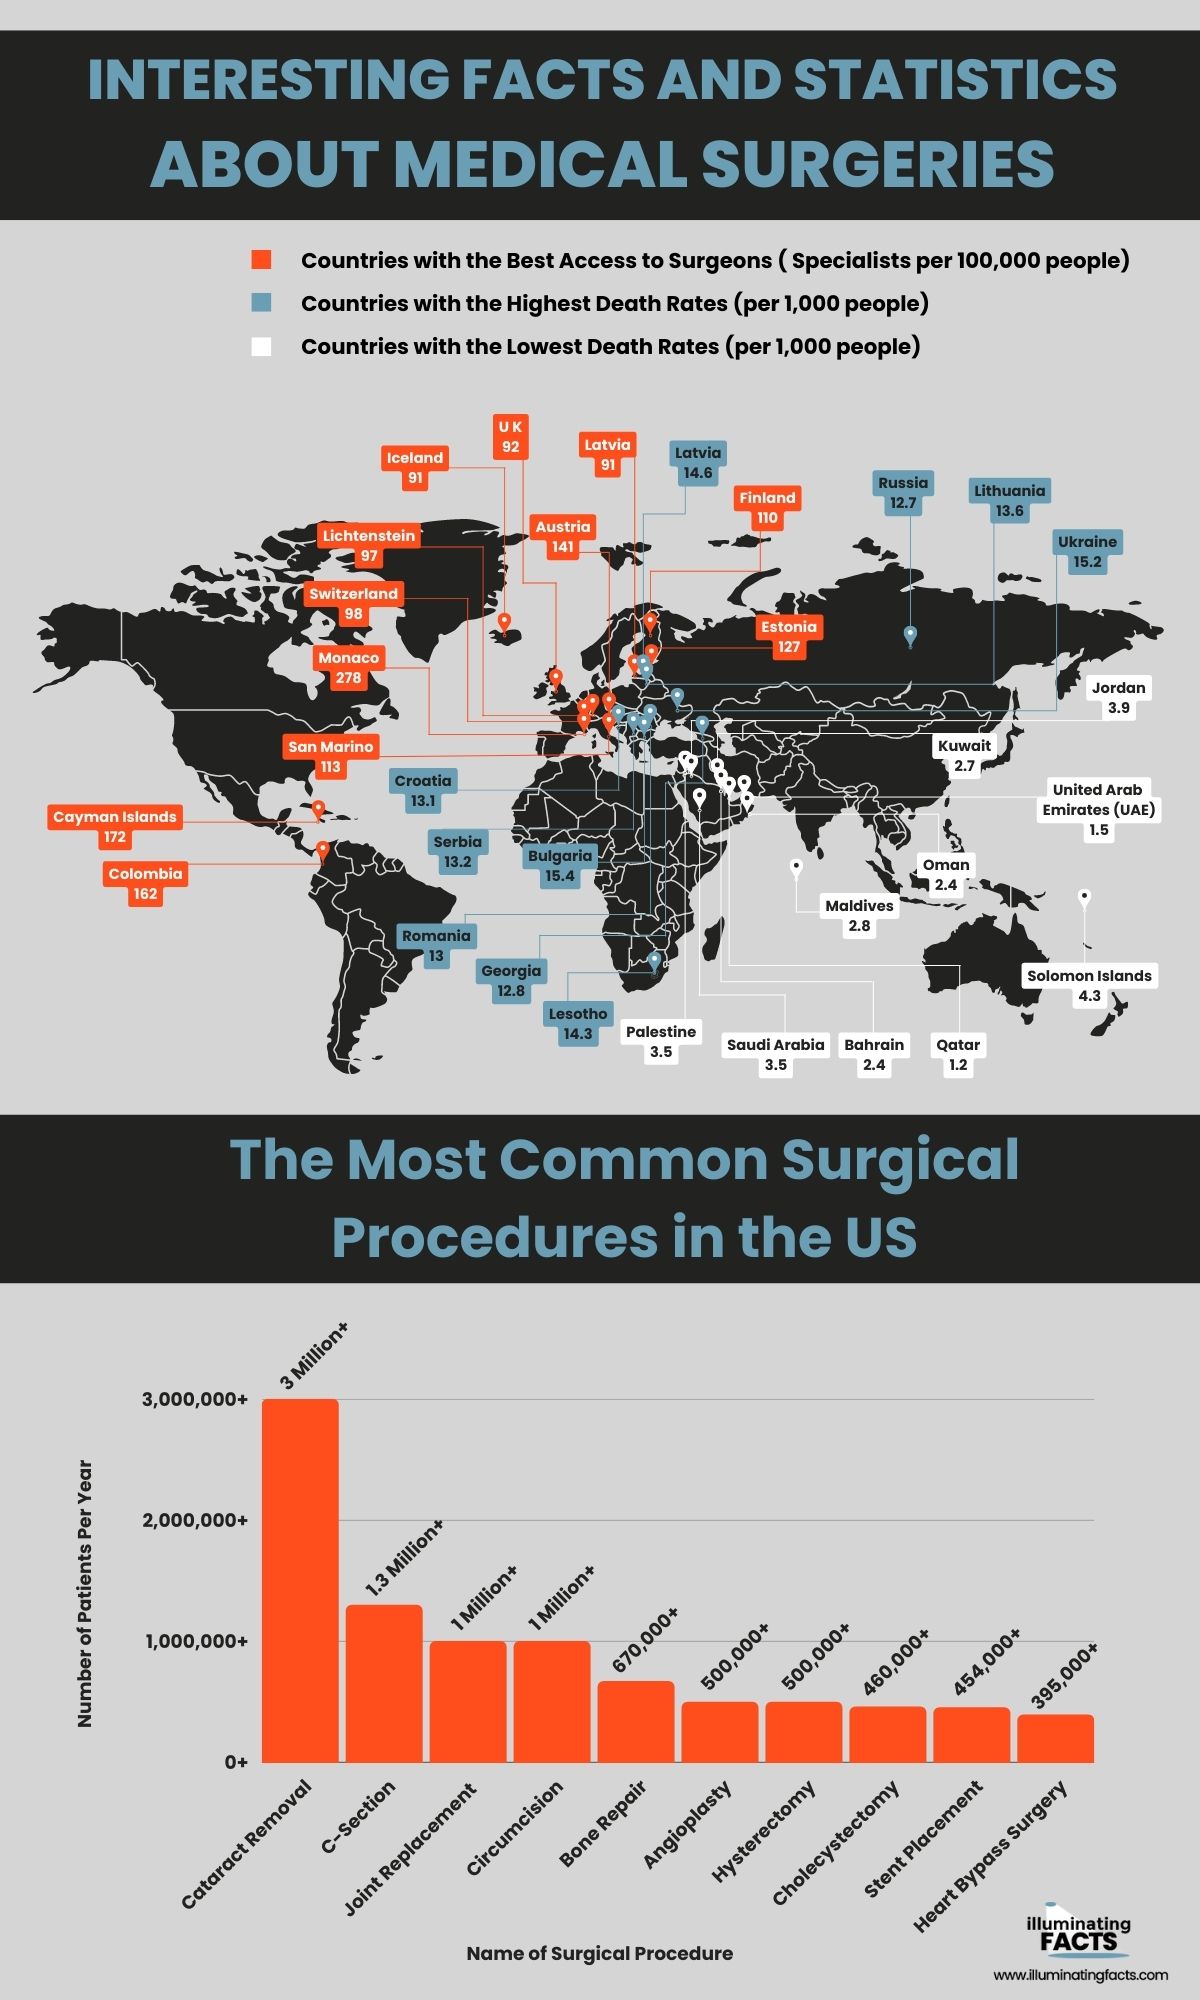 Interesting Facts and Statistics about Medical Surgeries